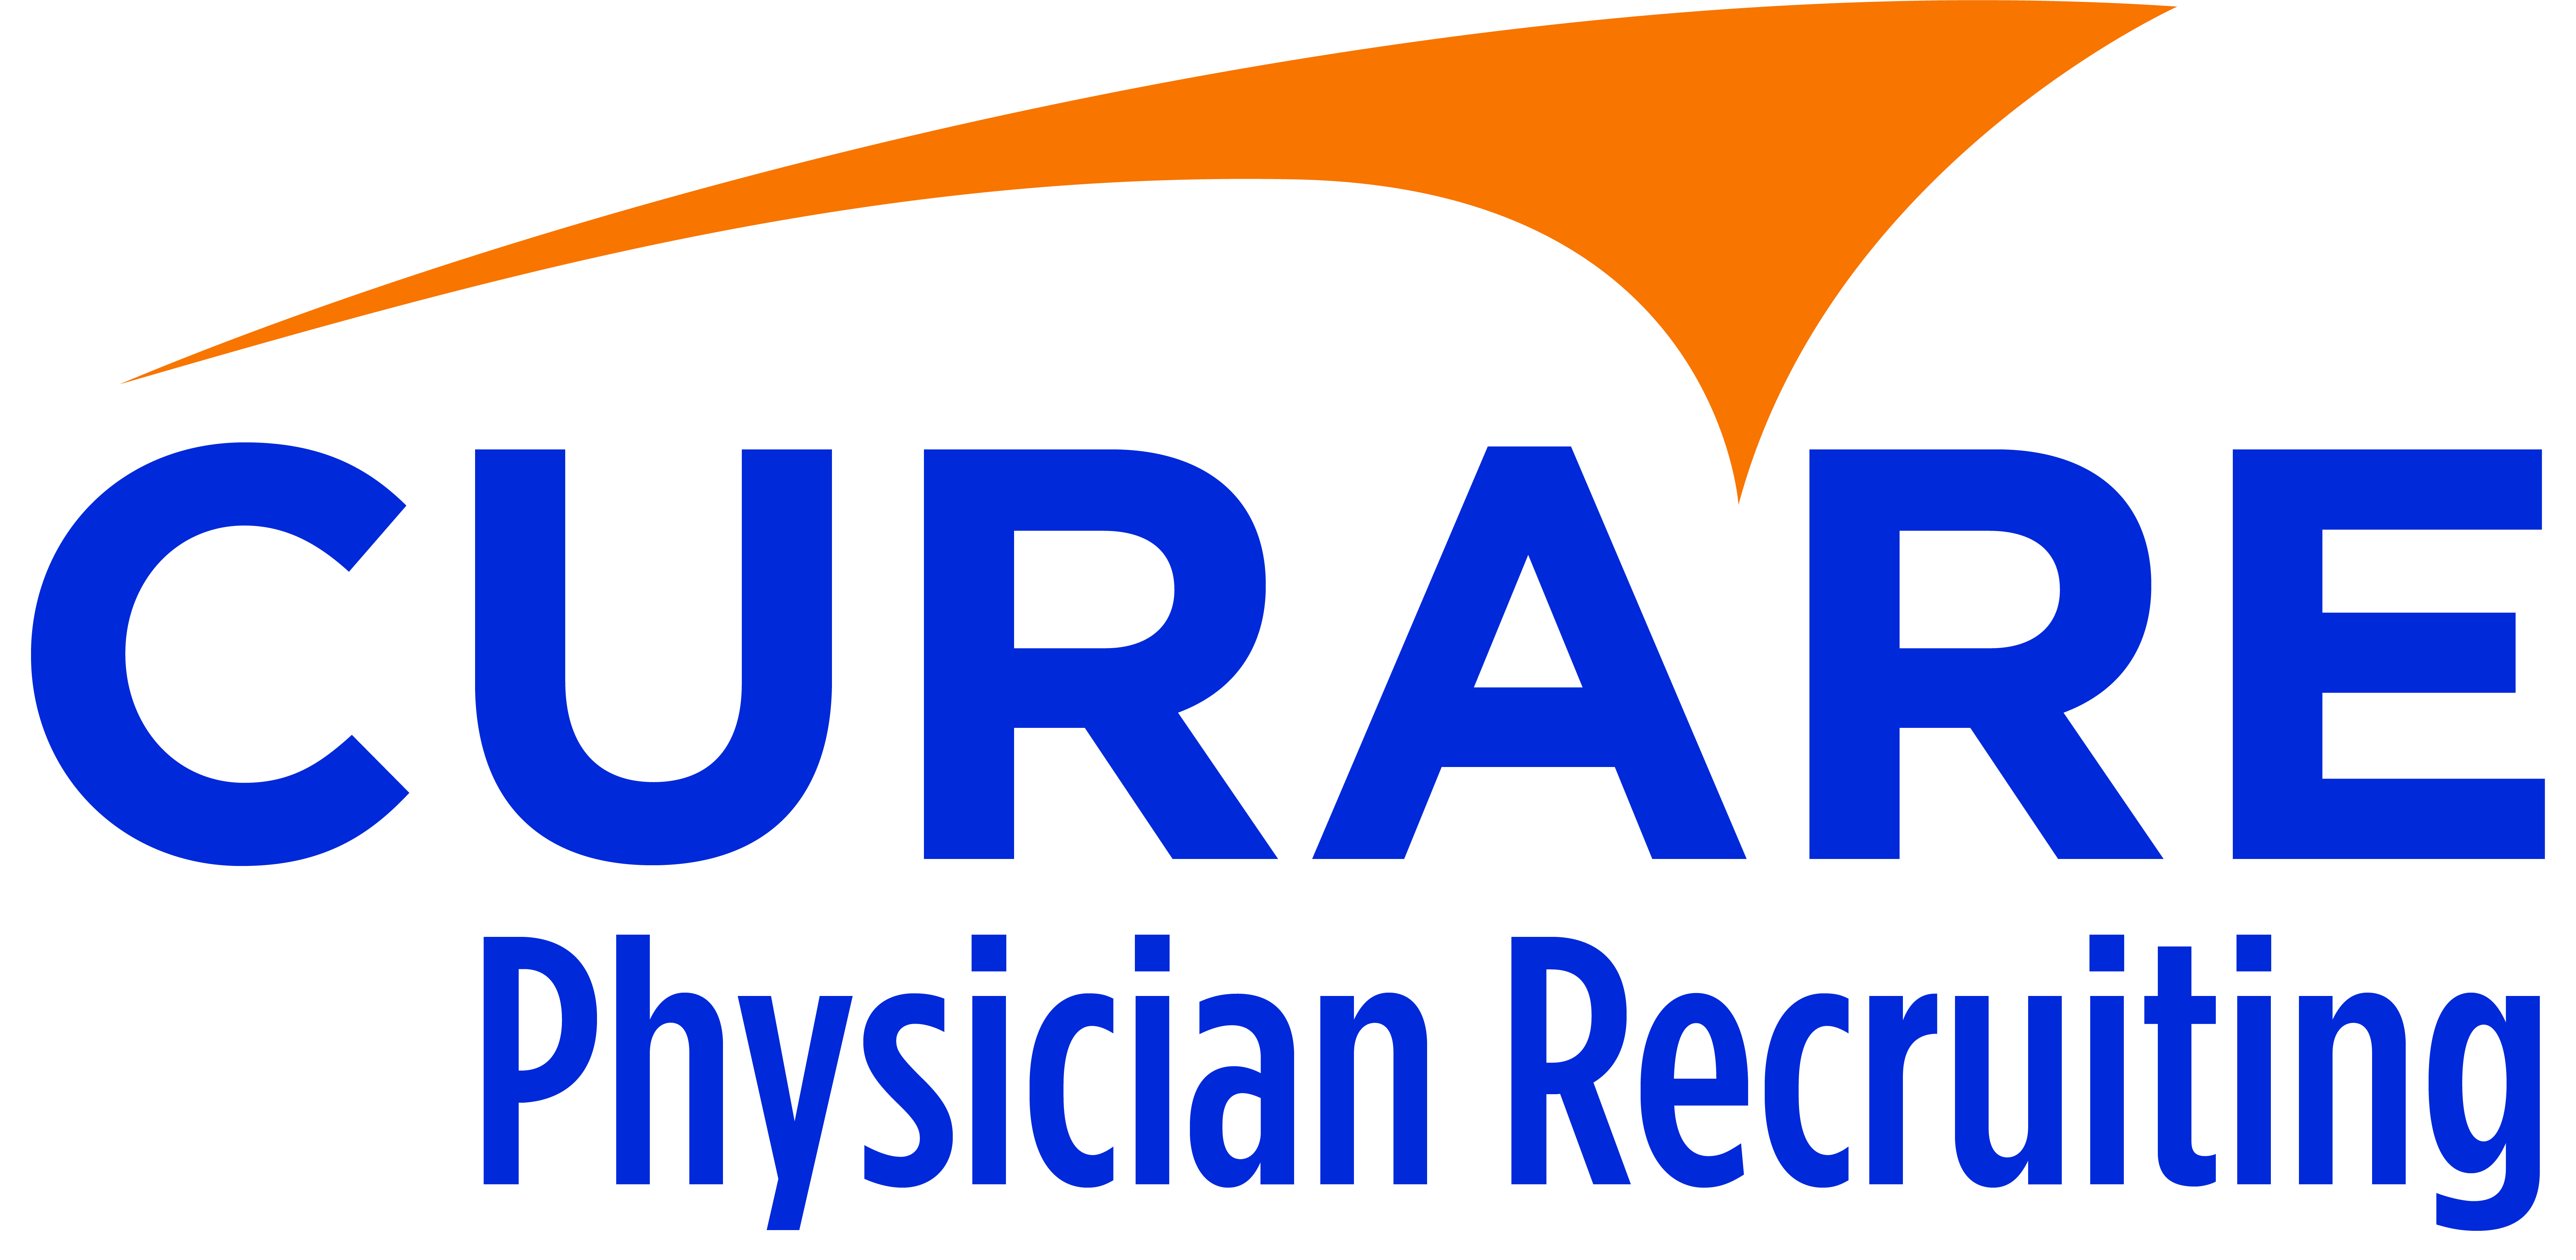 The Curare Group, Inc